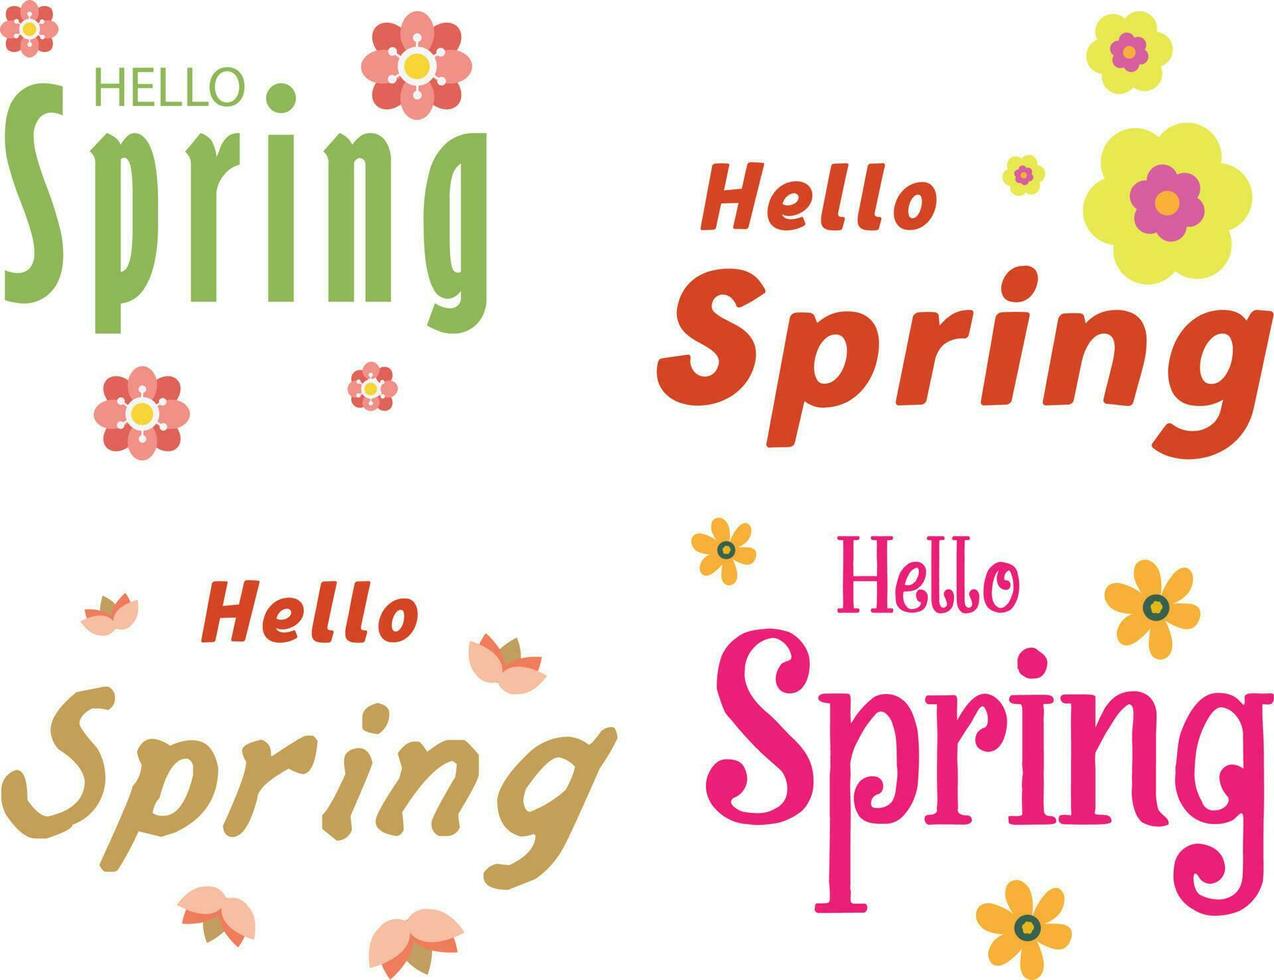 Hello Spring, Hello Spring typography with flowers and butterflies. Vector illustration